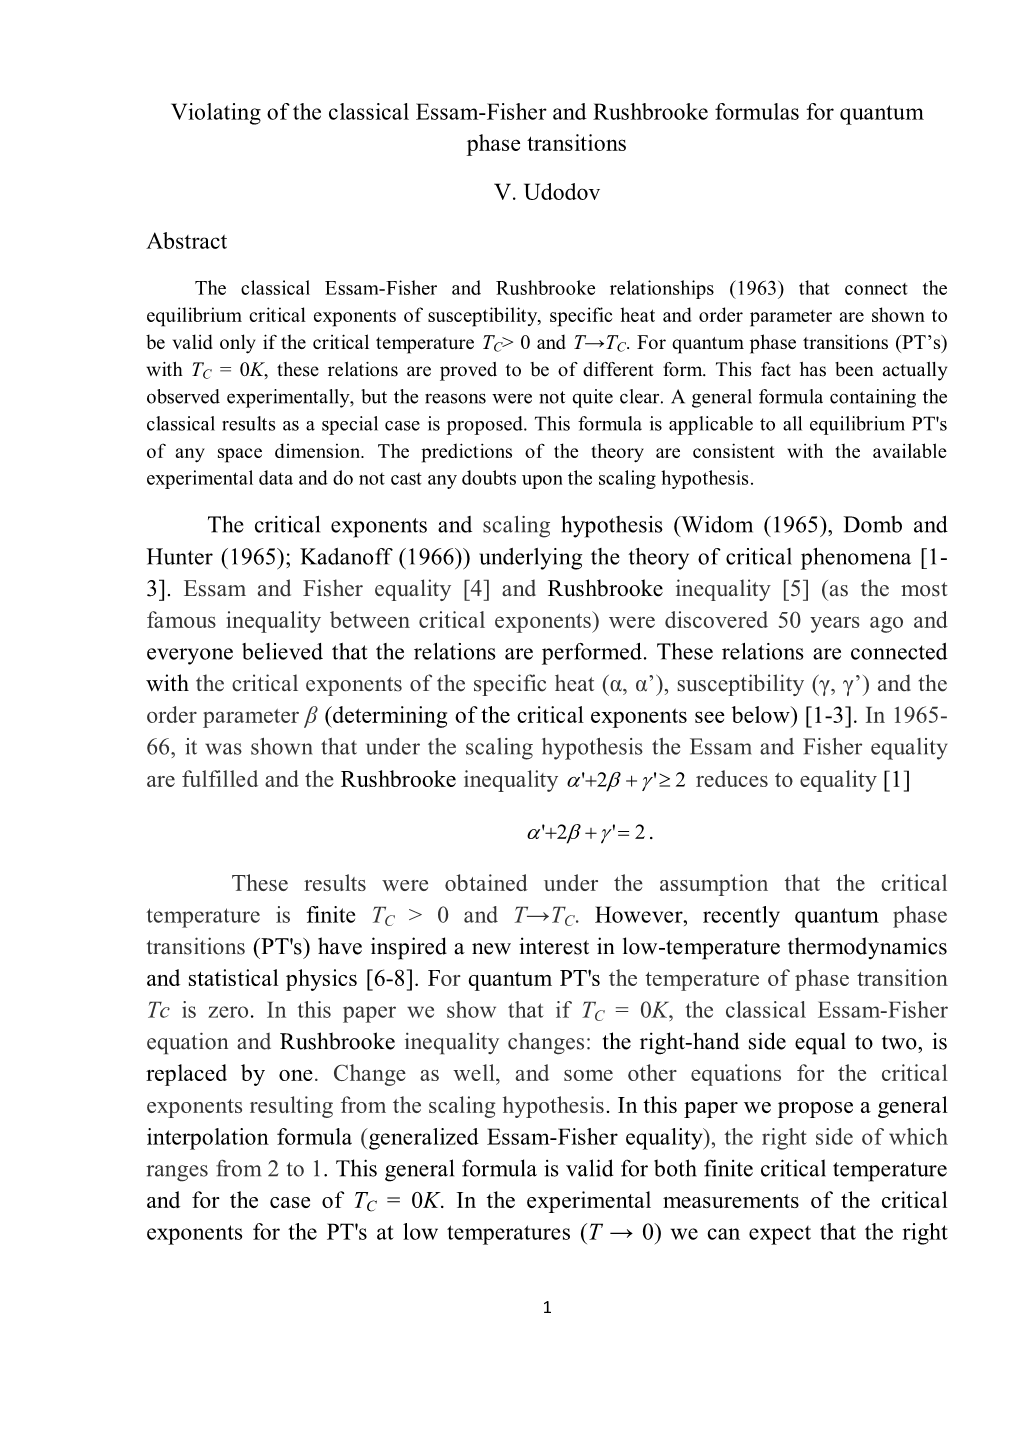 Violating of the Classical Essam-Fisher and Rushbrooke Formulas for Quantum Phase Transitions V. Udodov Abstract the Critical E